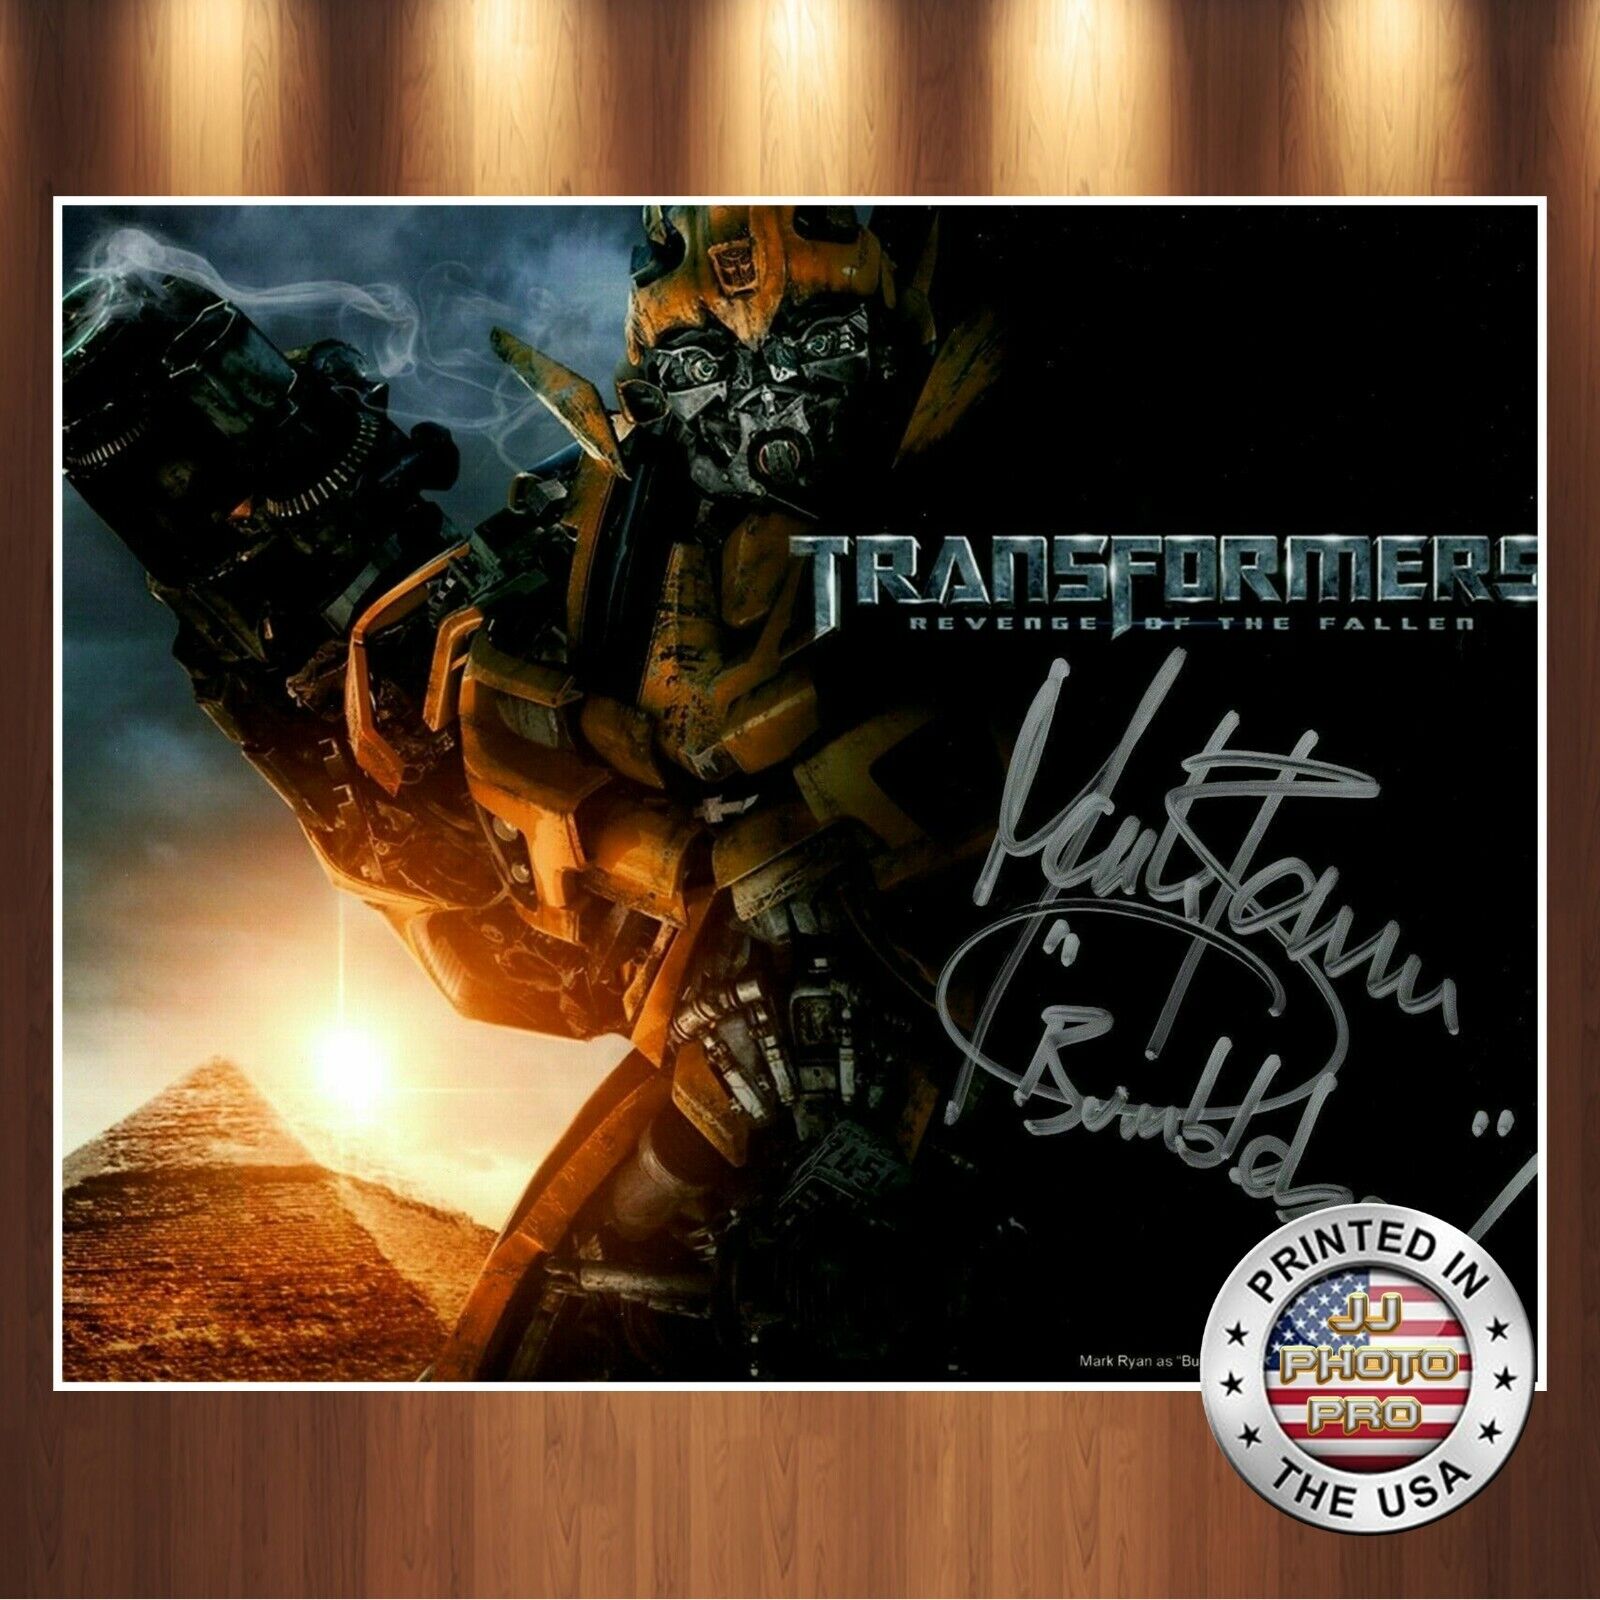 Mark Ryan Autographed Signed 8x10 Photo Poster painting (Transformers) REPRINT